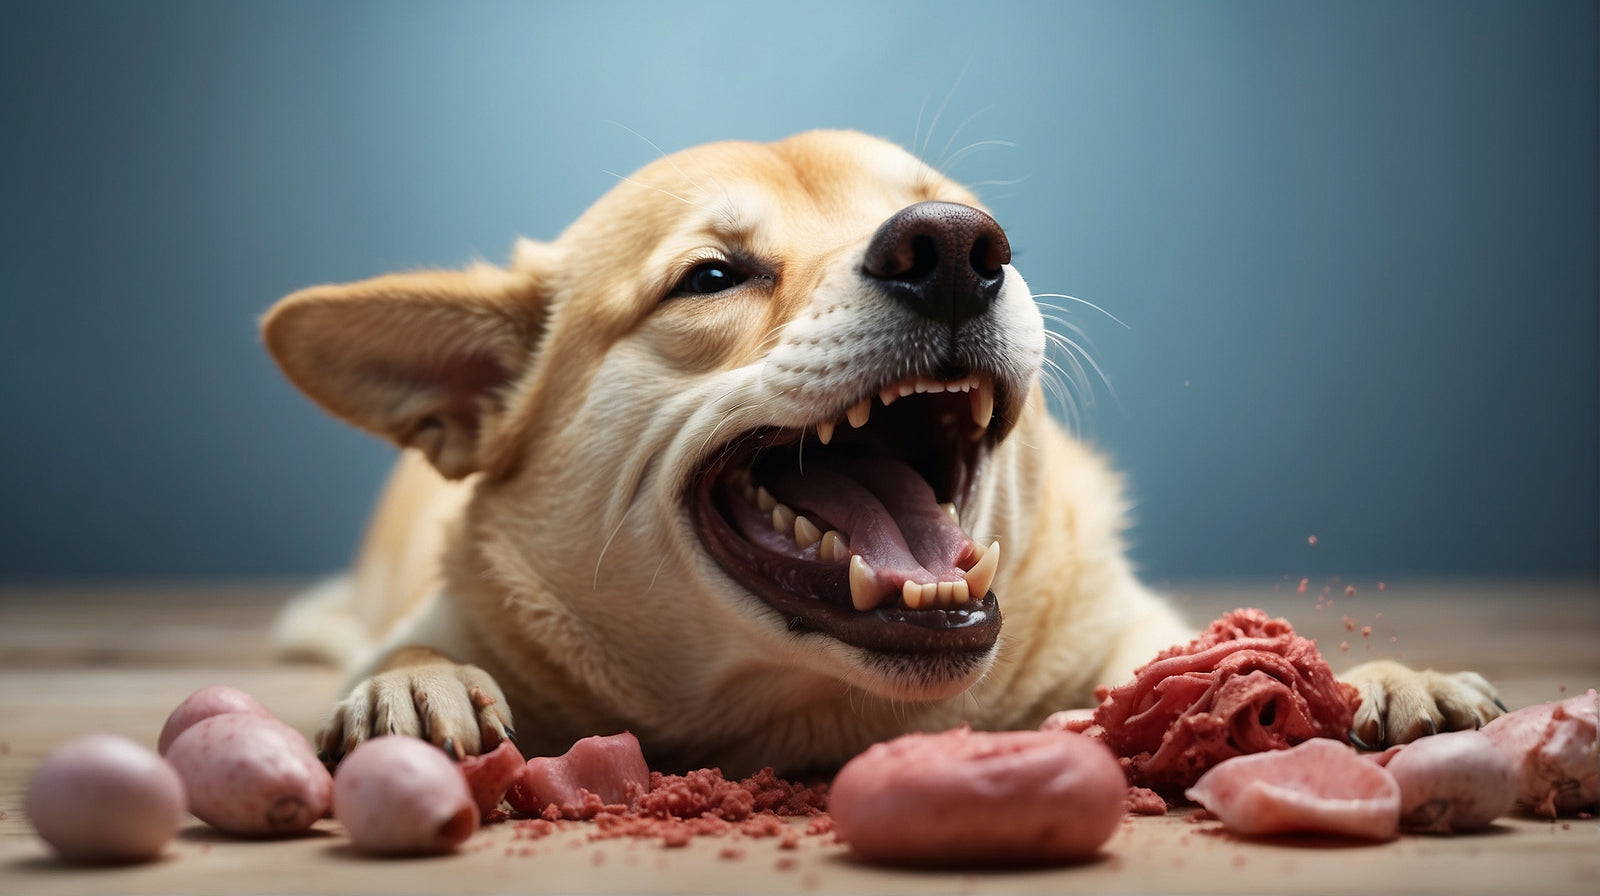 Are Dog Mouths Cleaner Than Humans'?